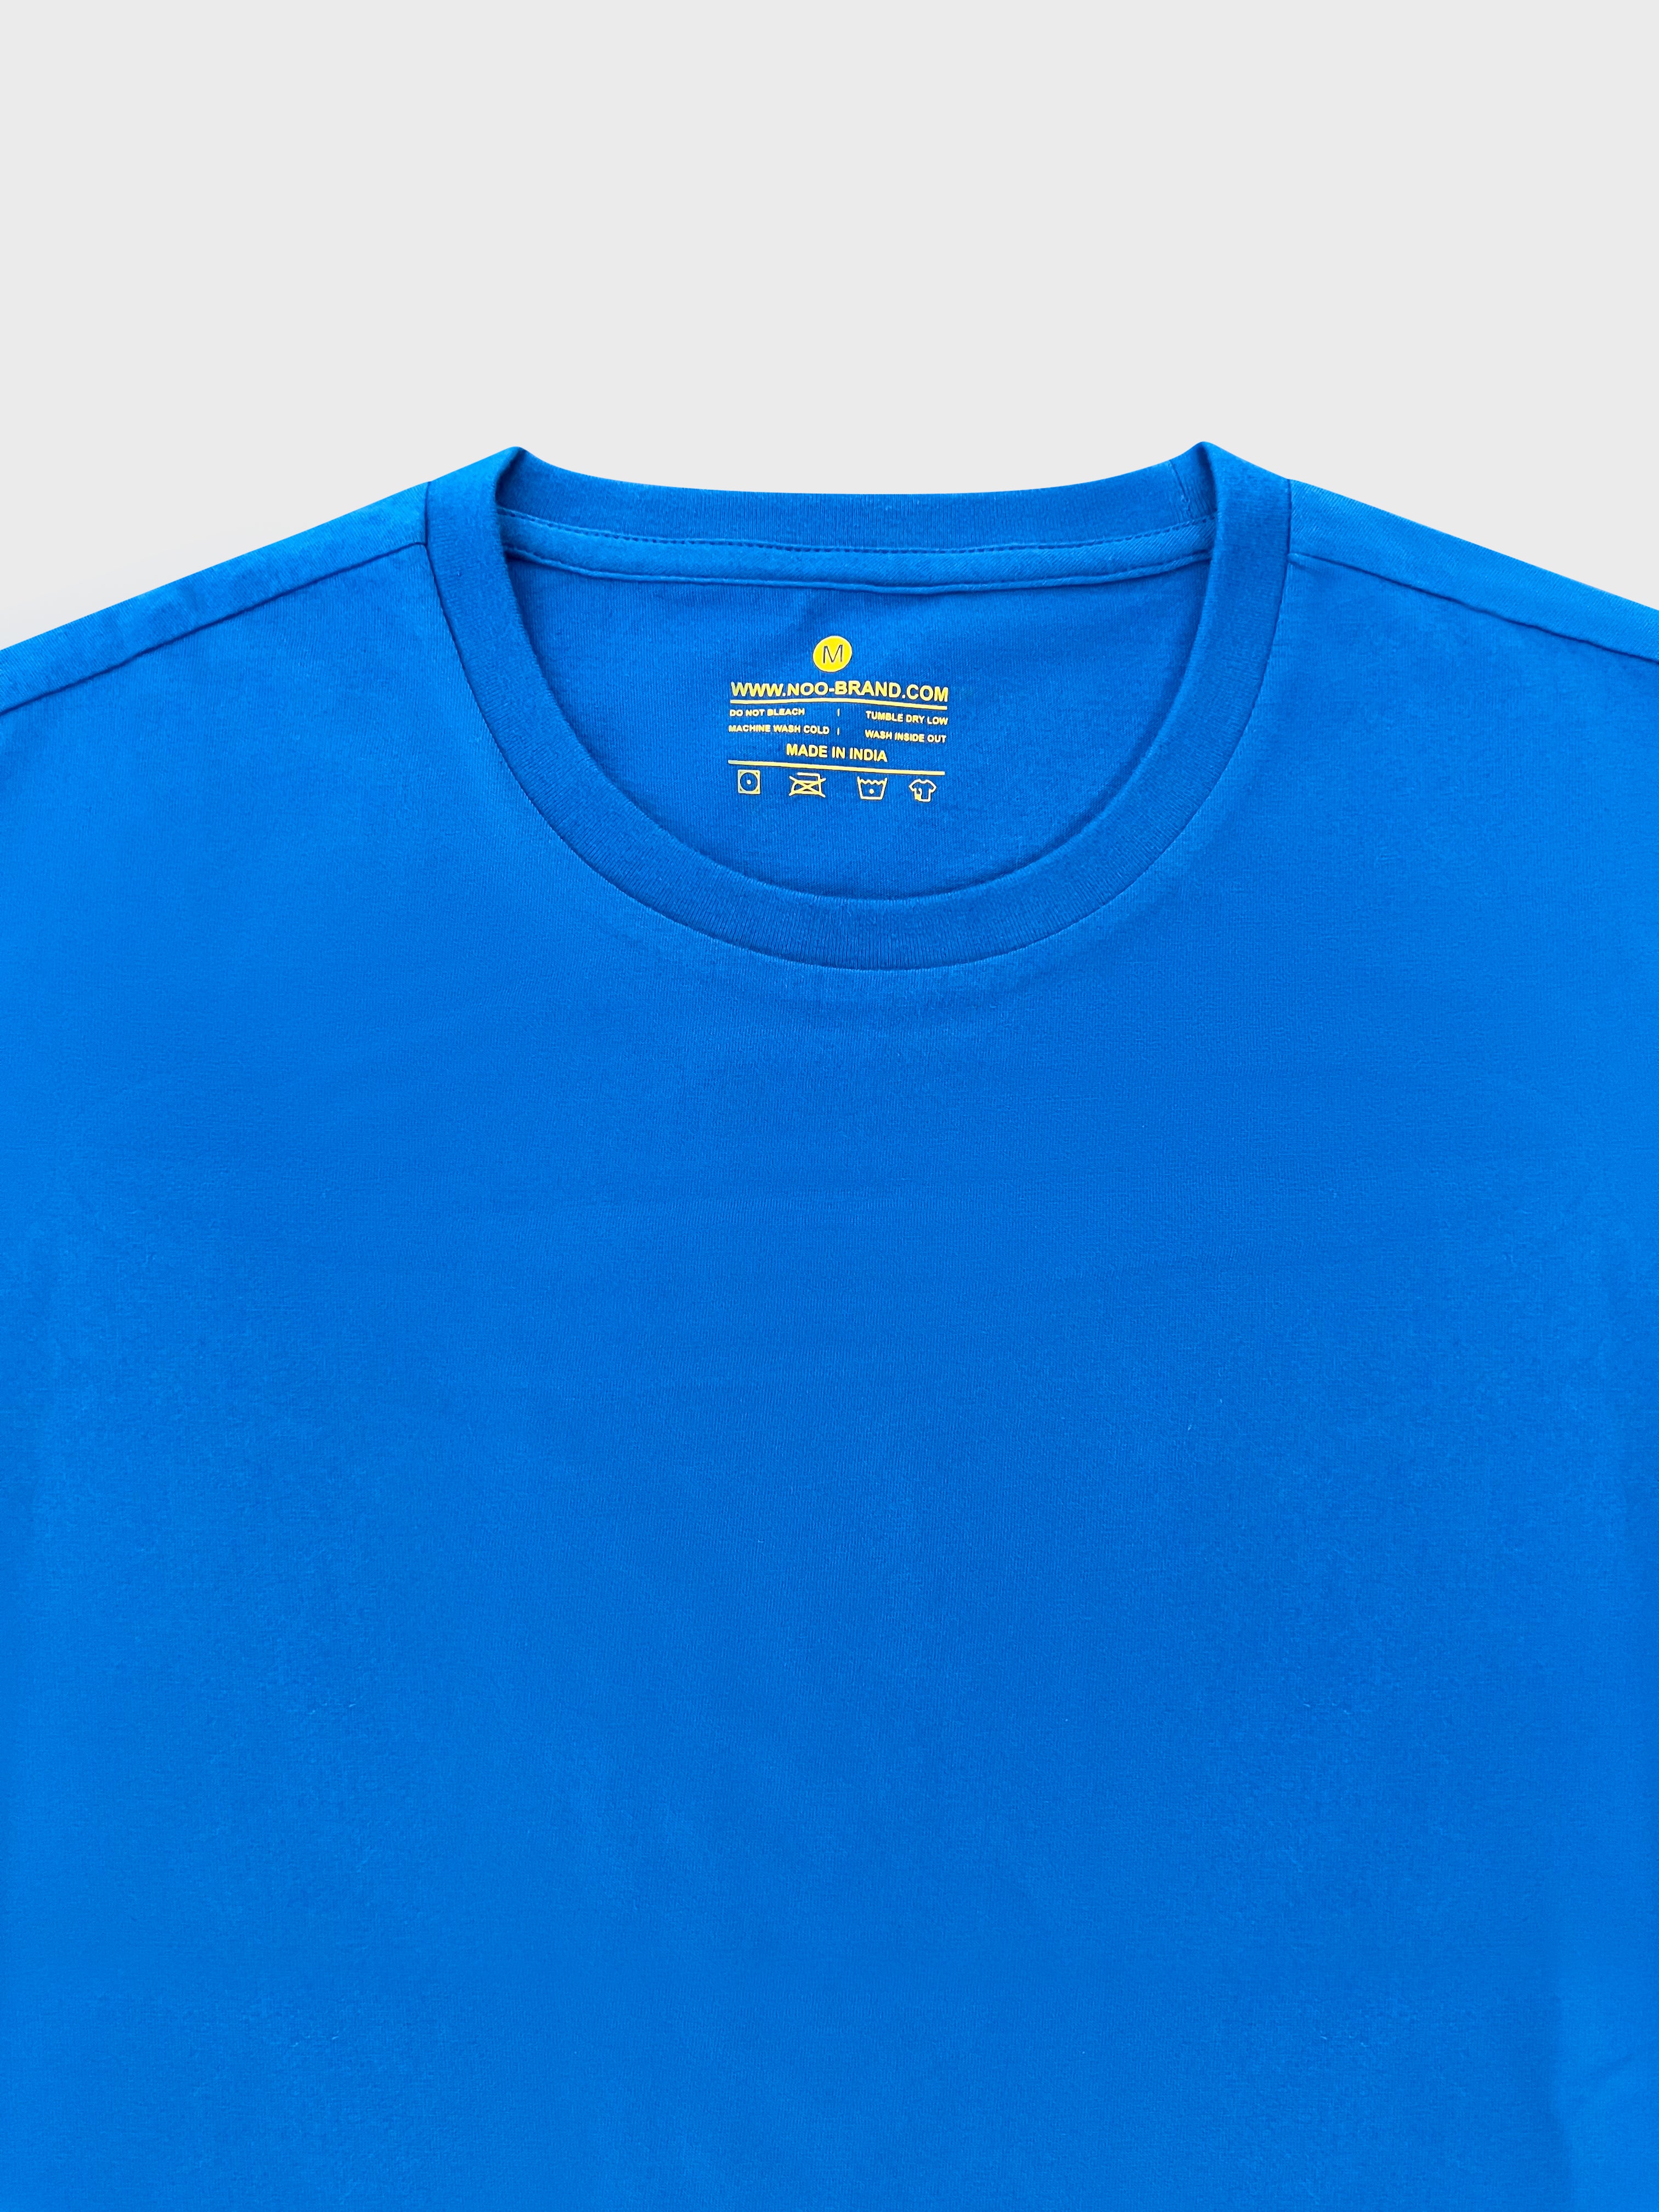 Crew Neck Blue blank T-shirt  with NOO-BRAND Label